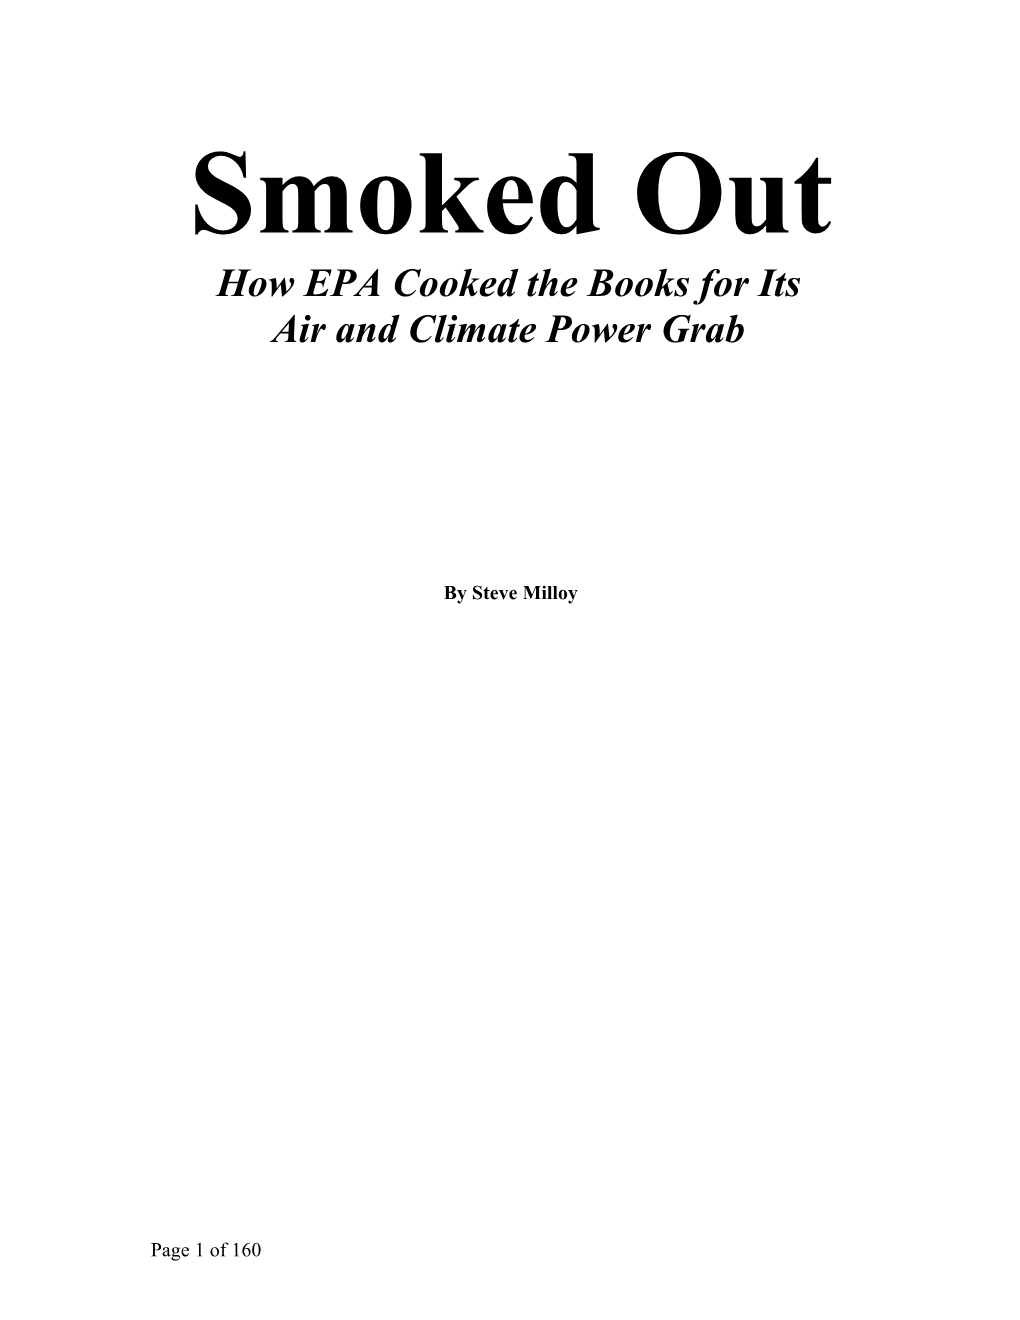 How EPA Cooked the Books for Its